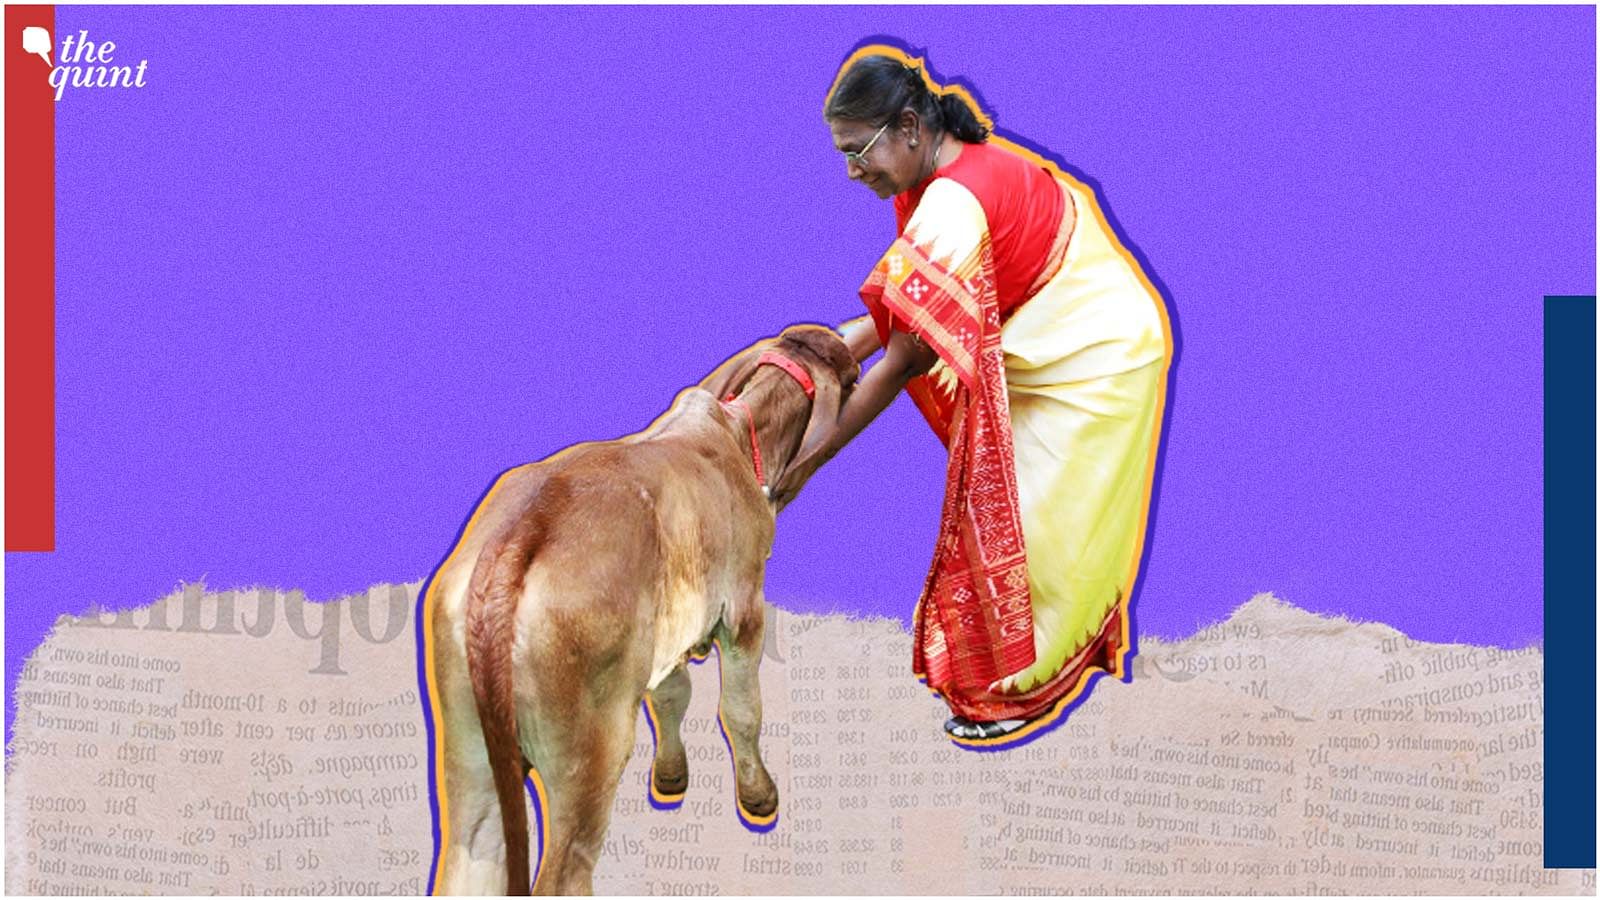 <div class="paragraphs"><p>Named Ganga, India's first ever cloned cow was born on 16 March, weighed 32 kg at the time of birth, and is "growing well," according to the National Dairy Research Institute.</p></div>